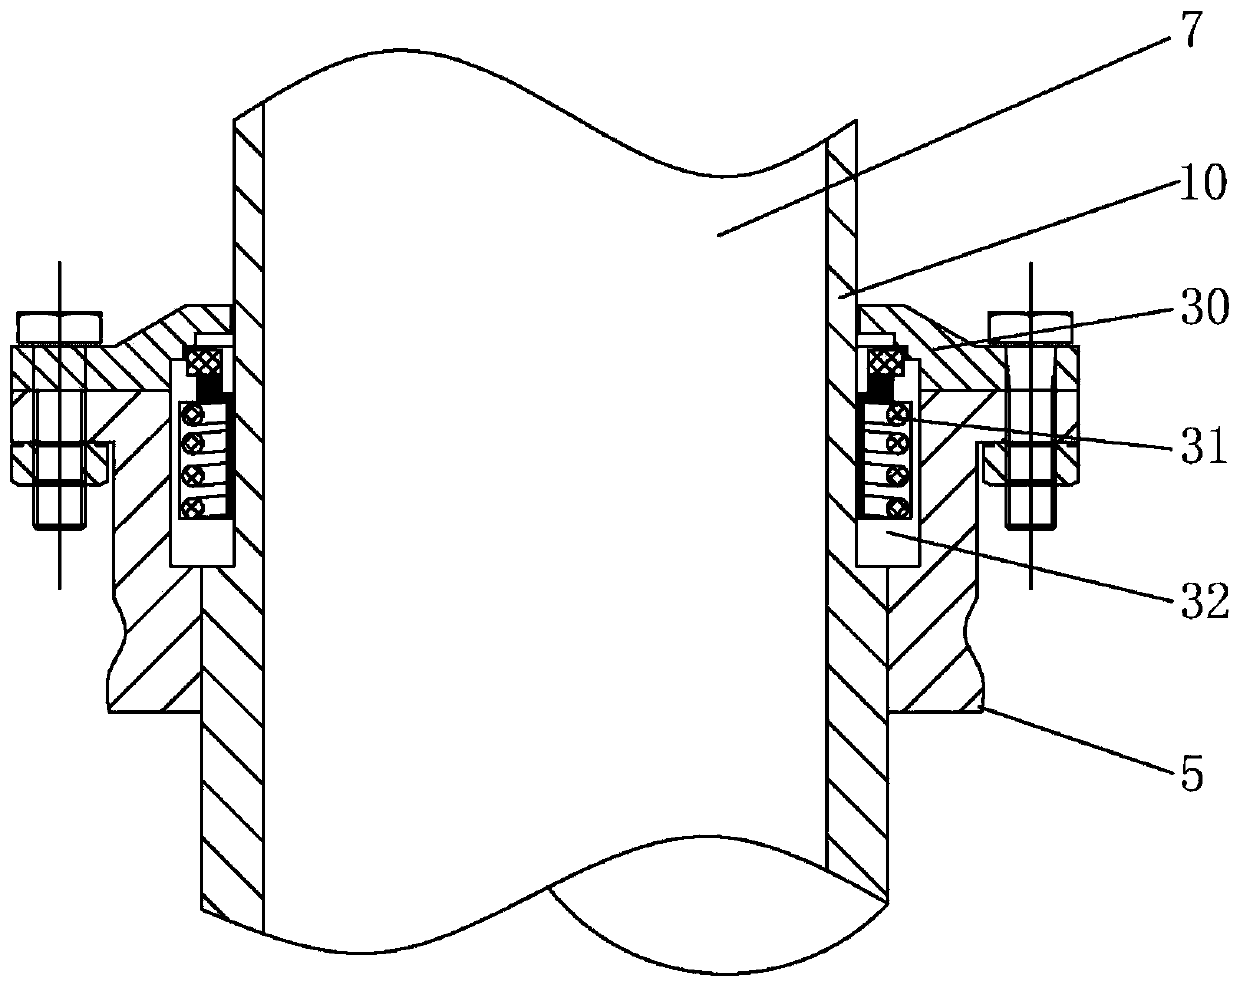 Single-stage double-suction horizontal self-sucking pump